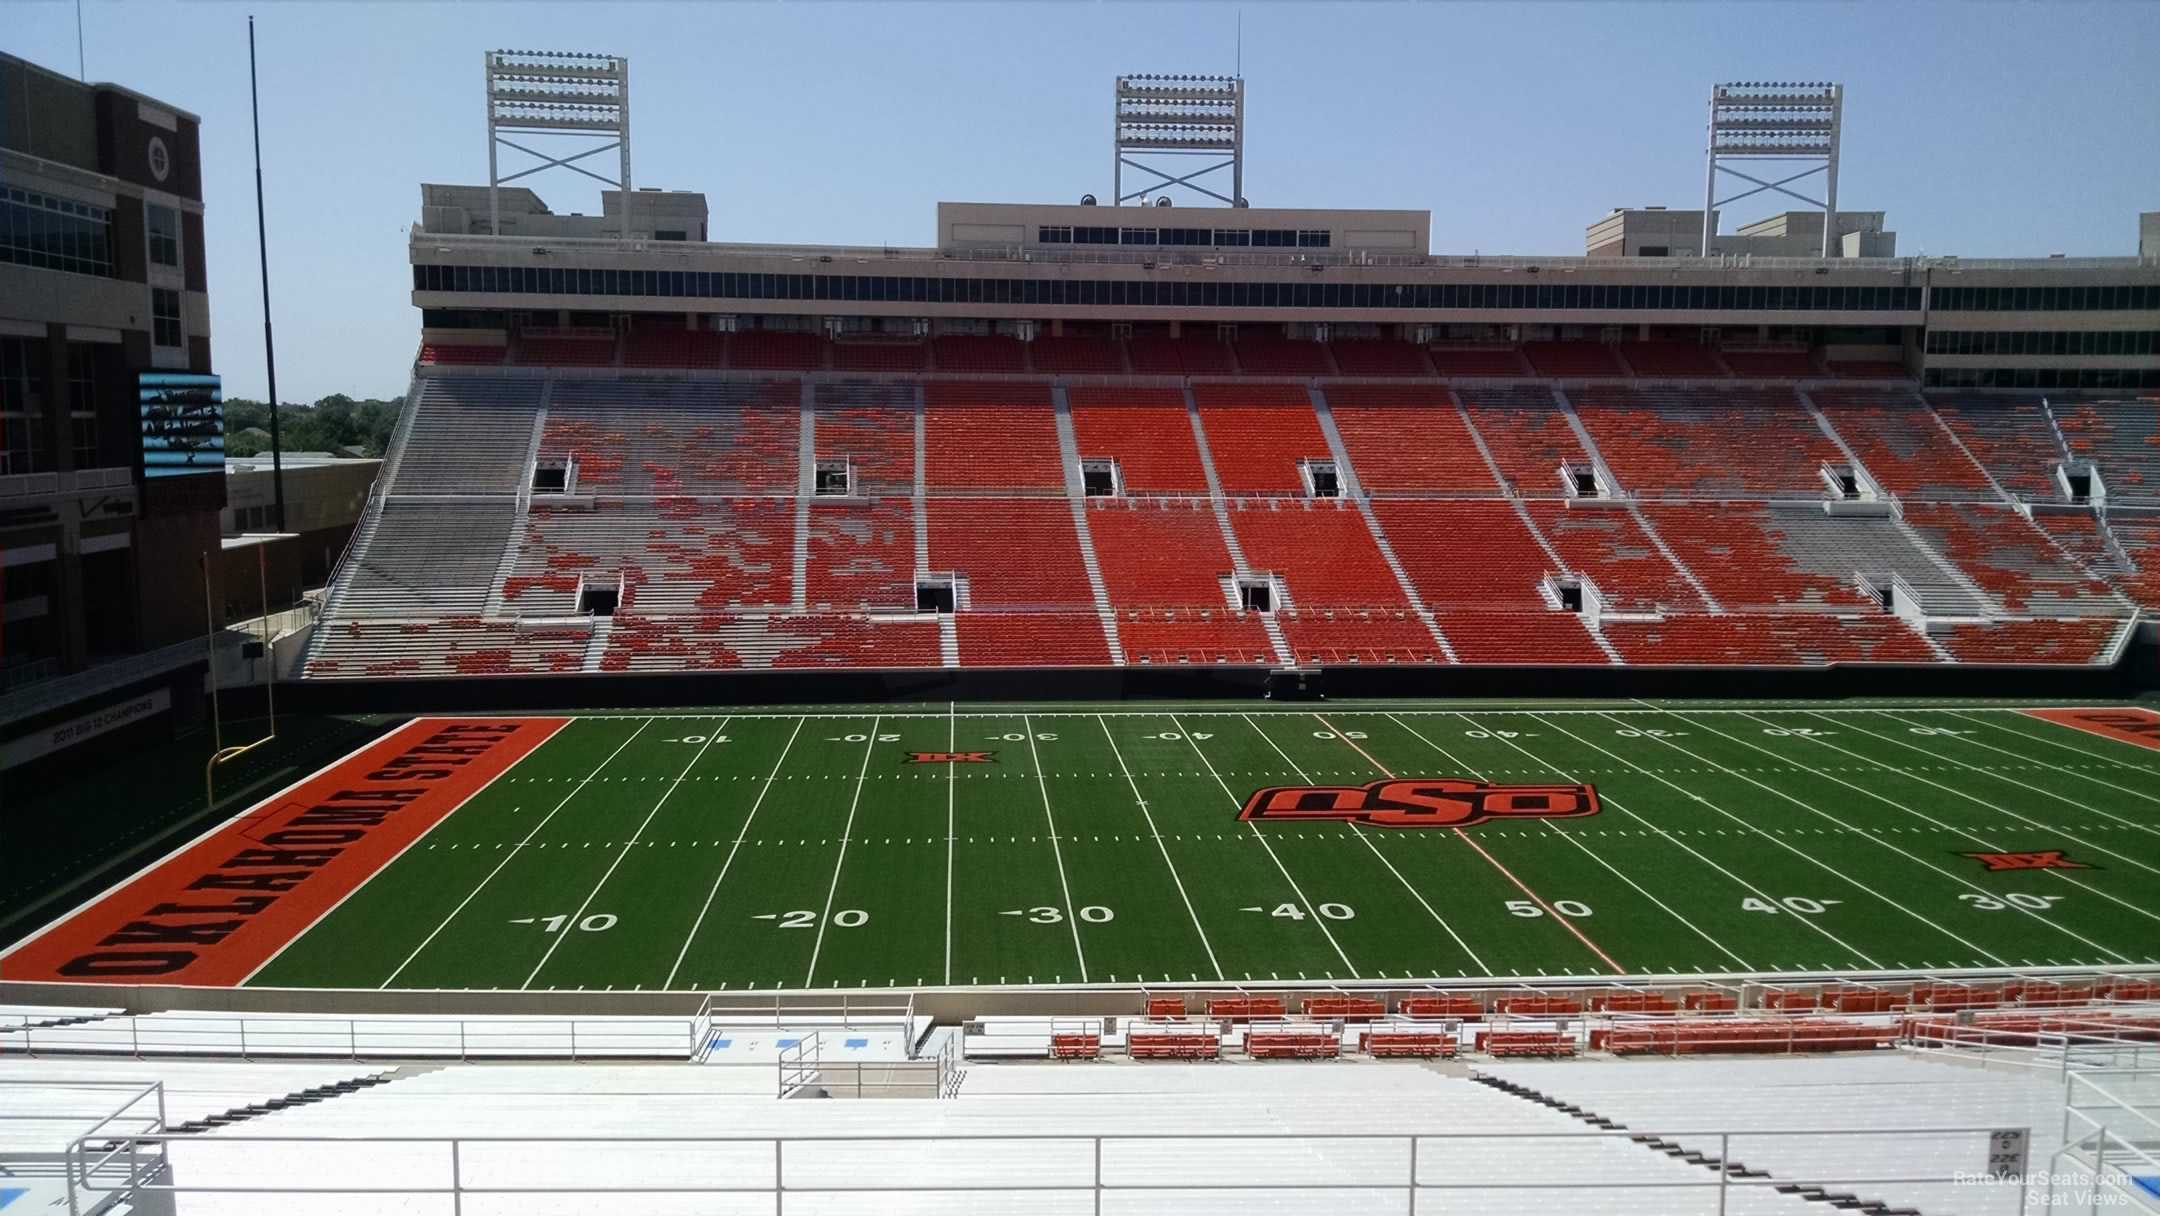 section 332a, row 19 seat view  - boone pickens stadium